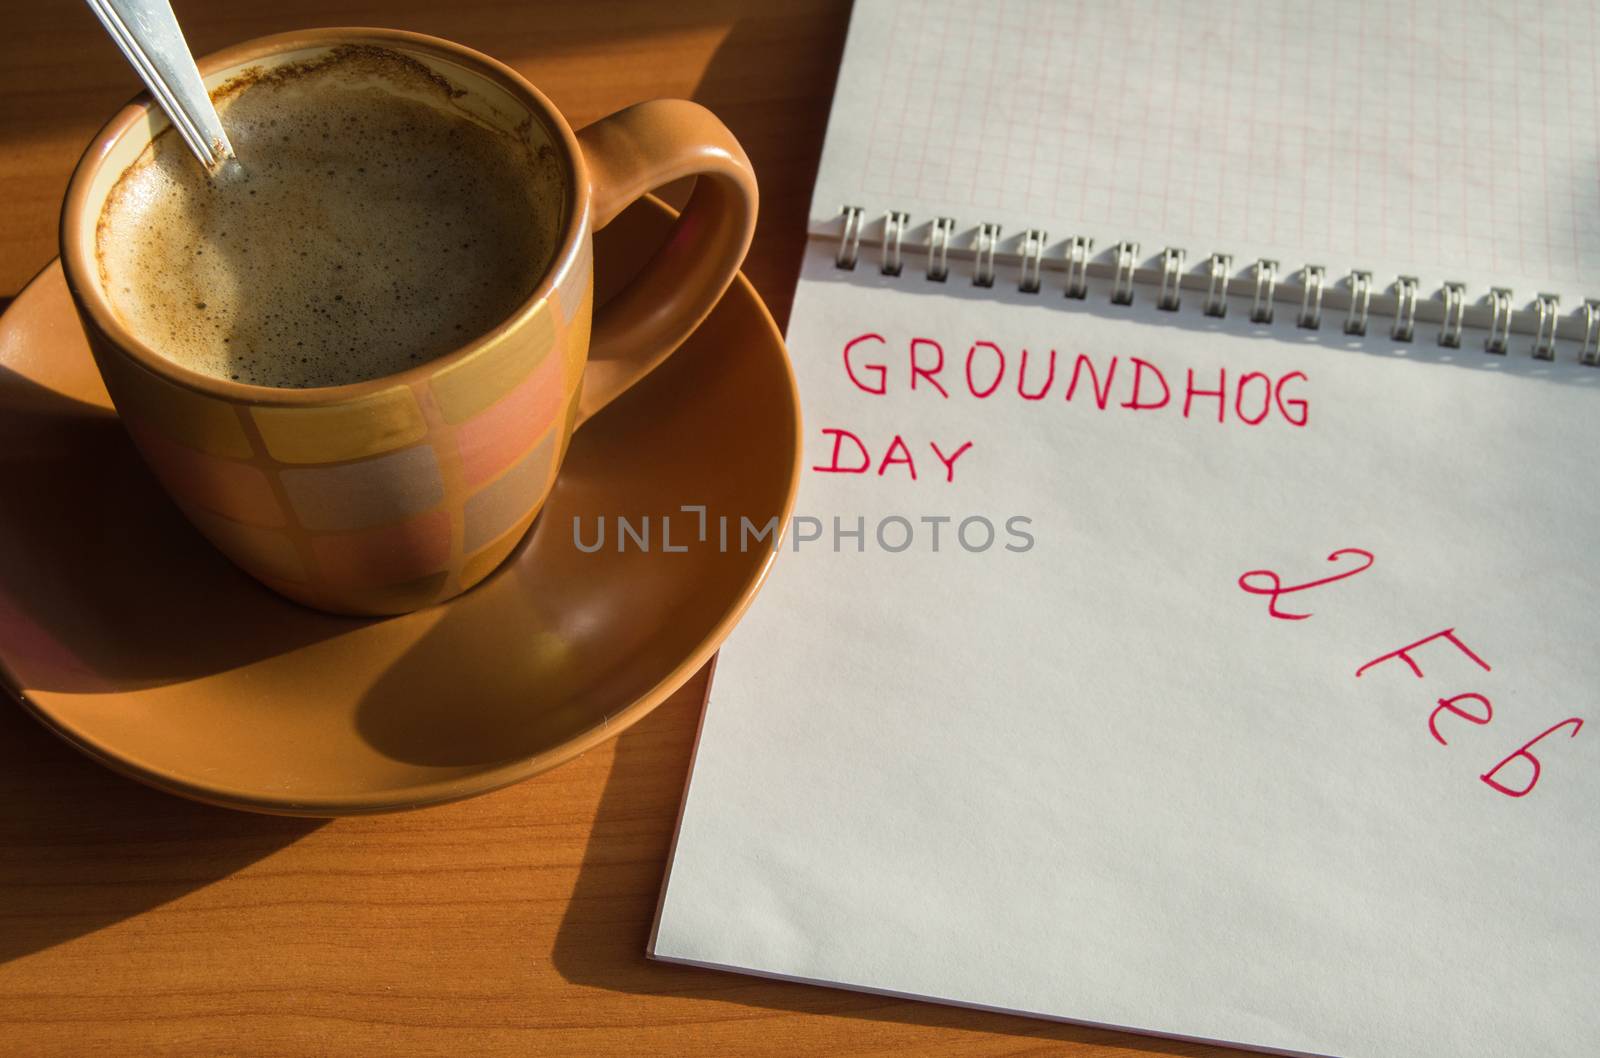 Groundhog day February Notepad with the date of 2 Feb and Cup of espresso.